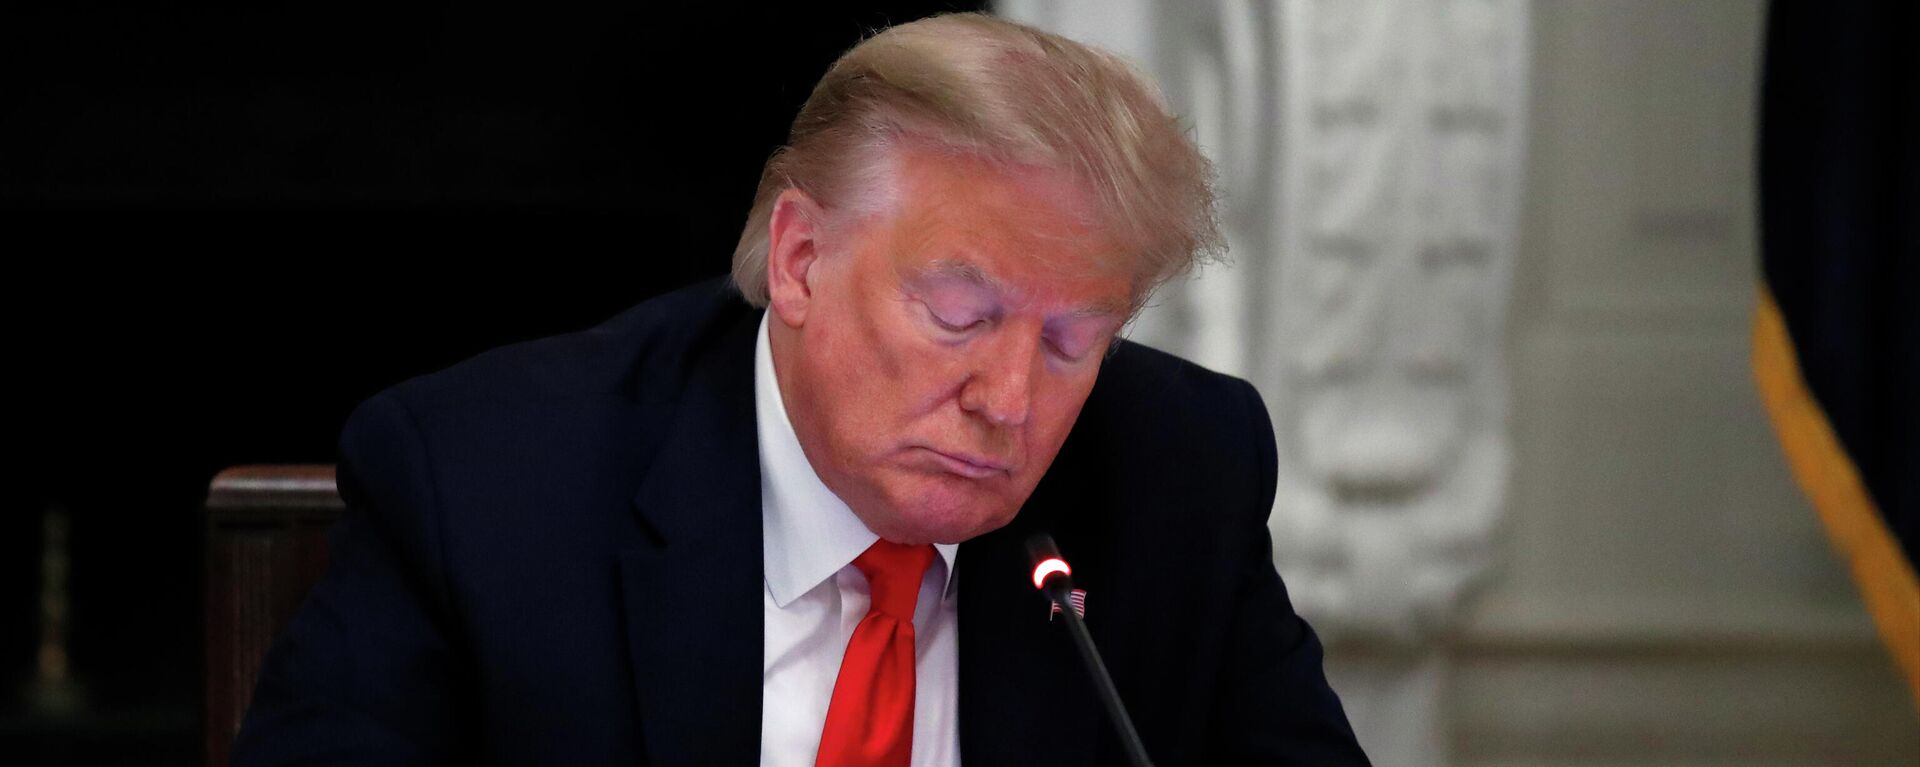  In this Thursday, June 18, 2020 file photo, President Donald Trump looks at his phone during a roundtable with governors on the reopening of America's small businesses, in the State Dining Room of the White House in Washington. - Sputnik International, 1920, 19.02.2022